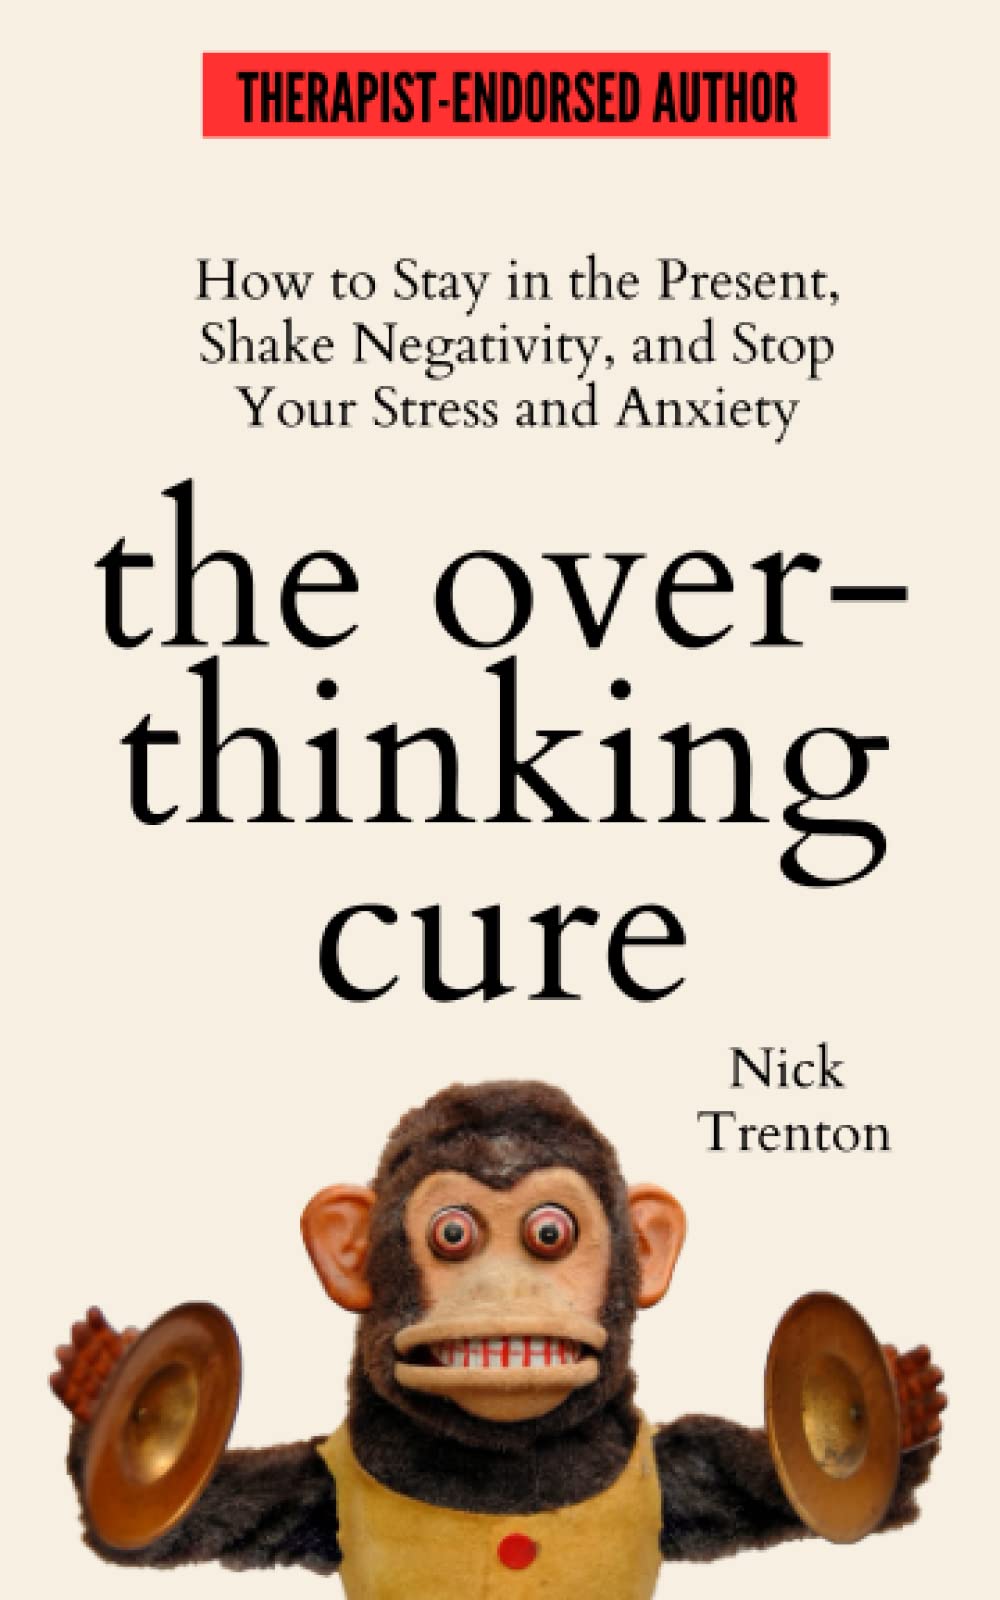 The Overthinking Cure: How to Stay in the Present, Shake Negativity, and Stop Your Stress and Anxiety (The Path to Calm)